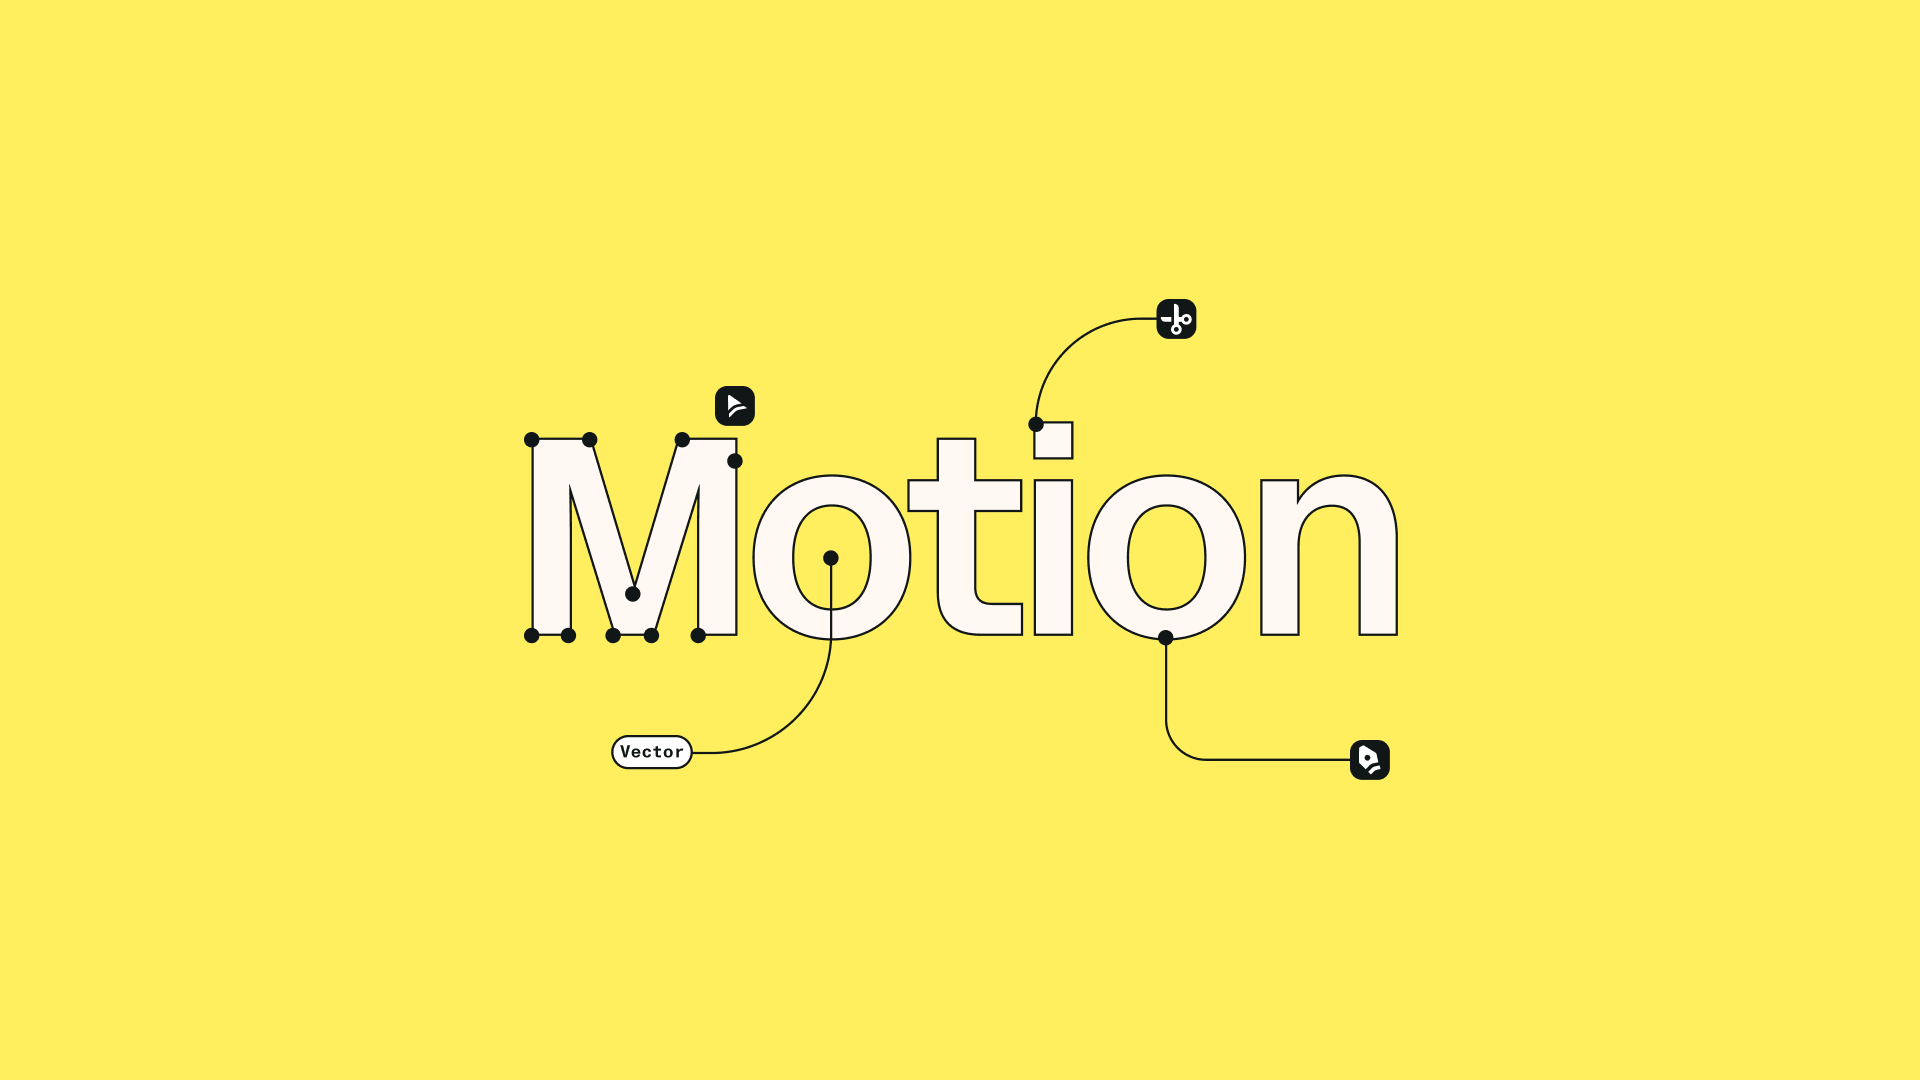 Strengthen your brand image with motion graphics